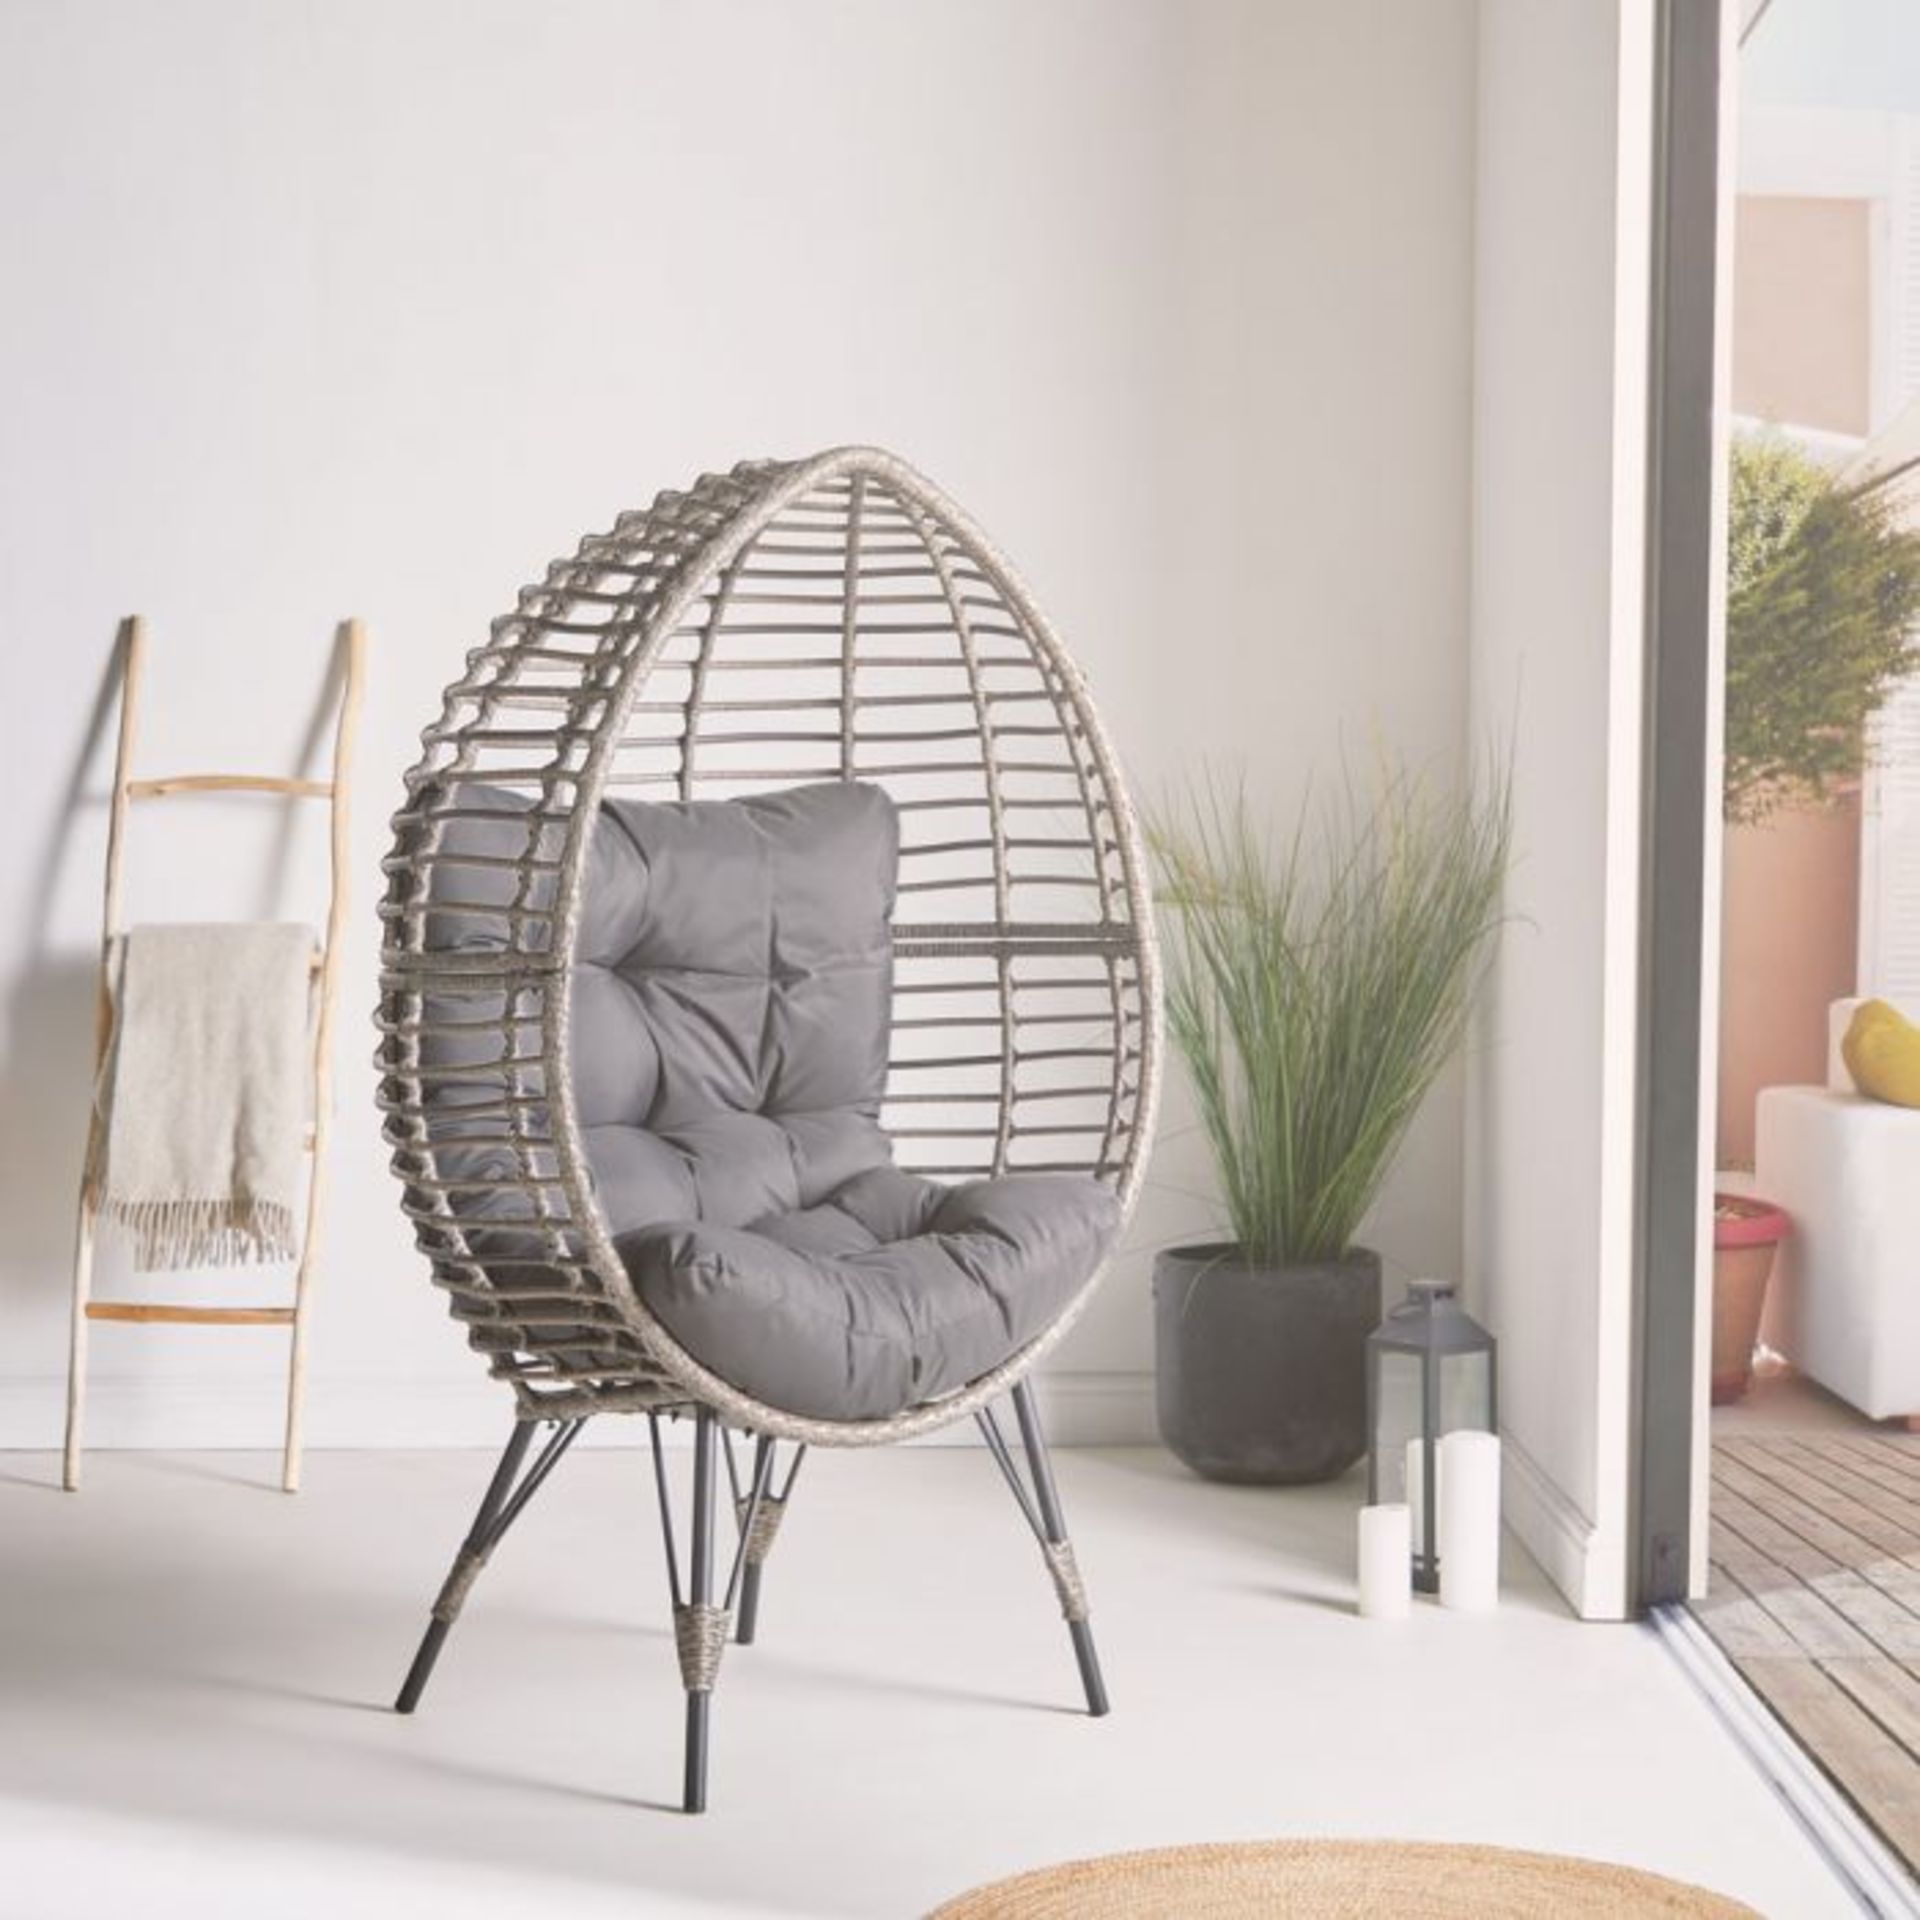 Freestanding Natural Rattan Egg Chair. RRP £549.99. Get cosy on this rattan cocoon chair. ( - Image 2 of 3